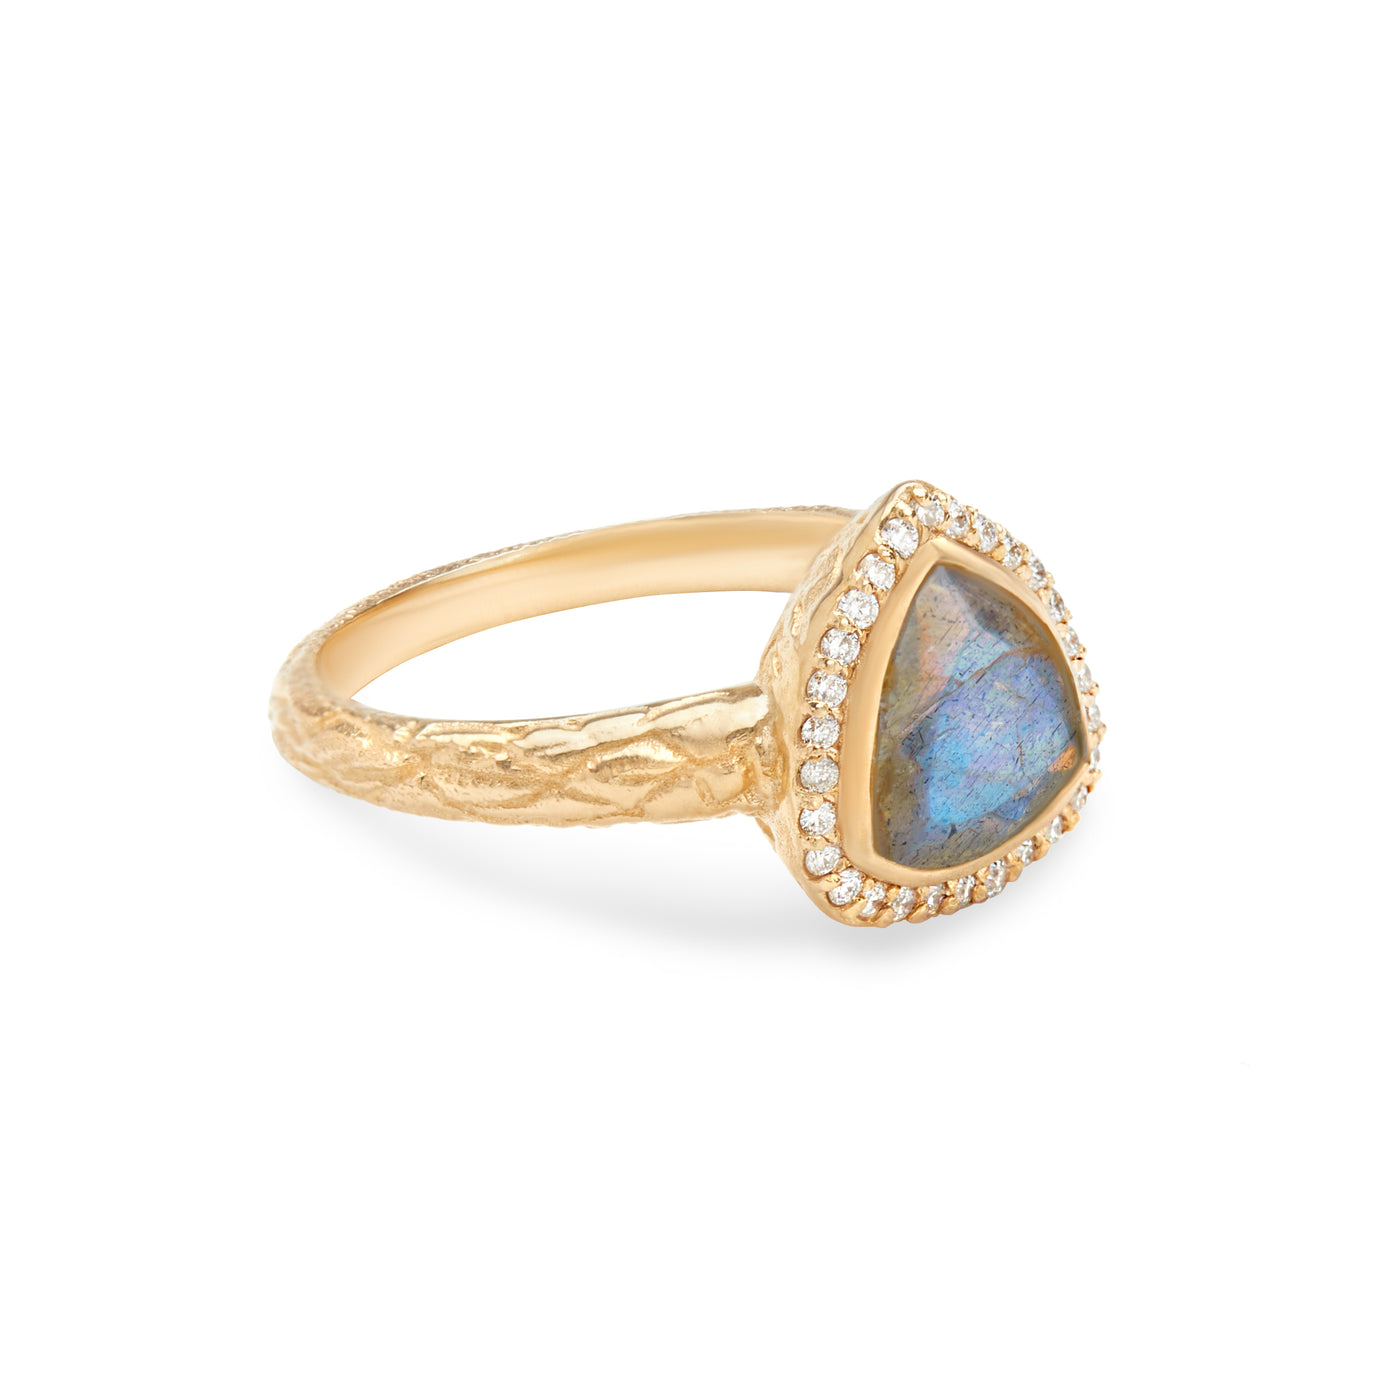 14 Karat Yellow Gold Ring with Triangle Shaped Labradorite with Halo of White Diamonds Against White Background turned for detail